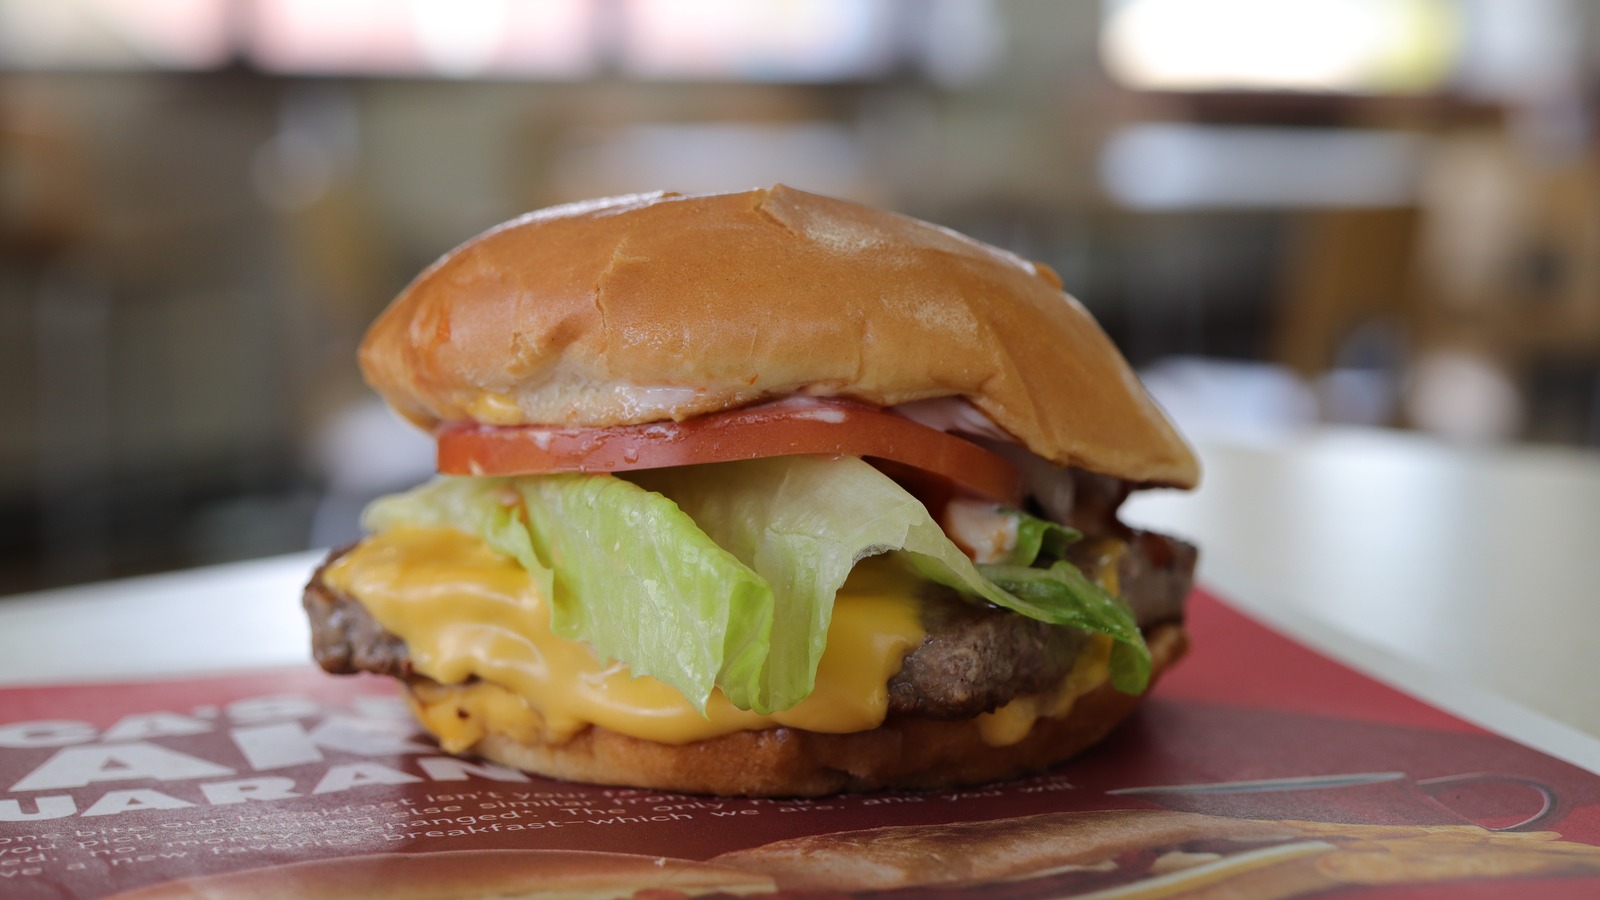 Wendy's free cheeseburger: How you can get the freebie this week